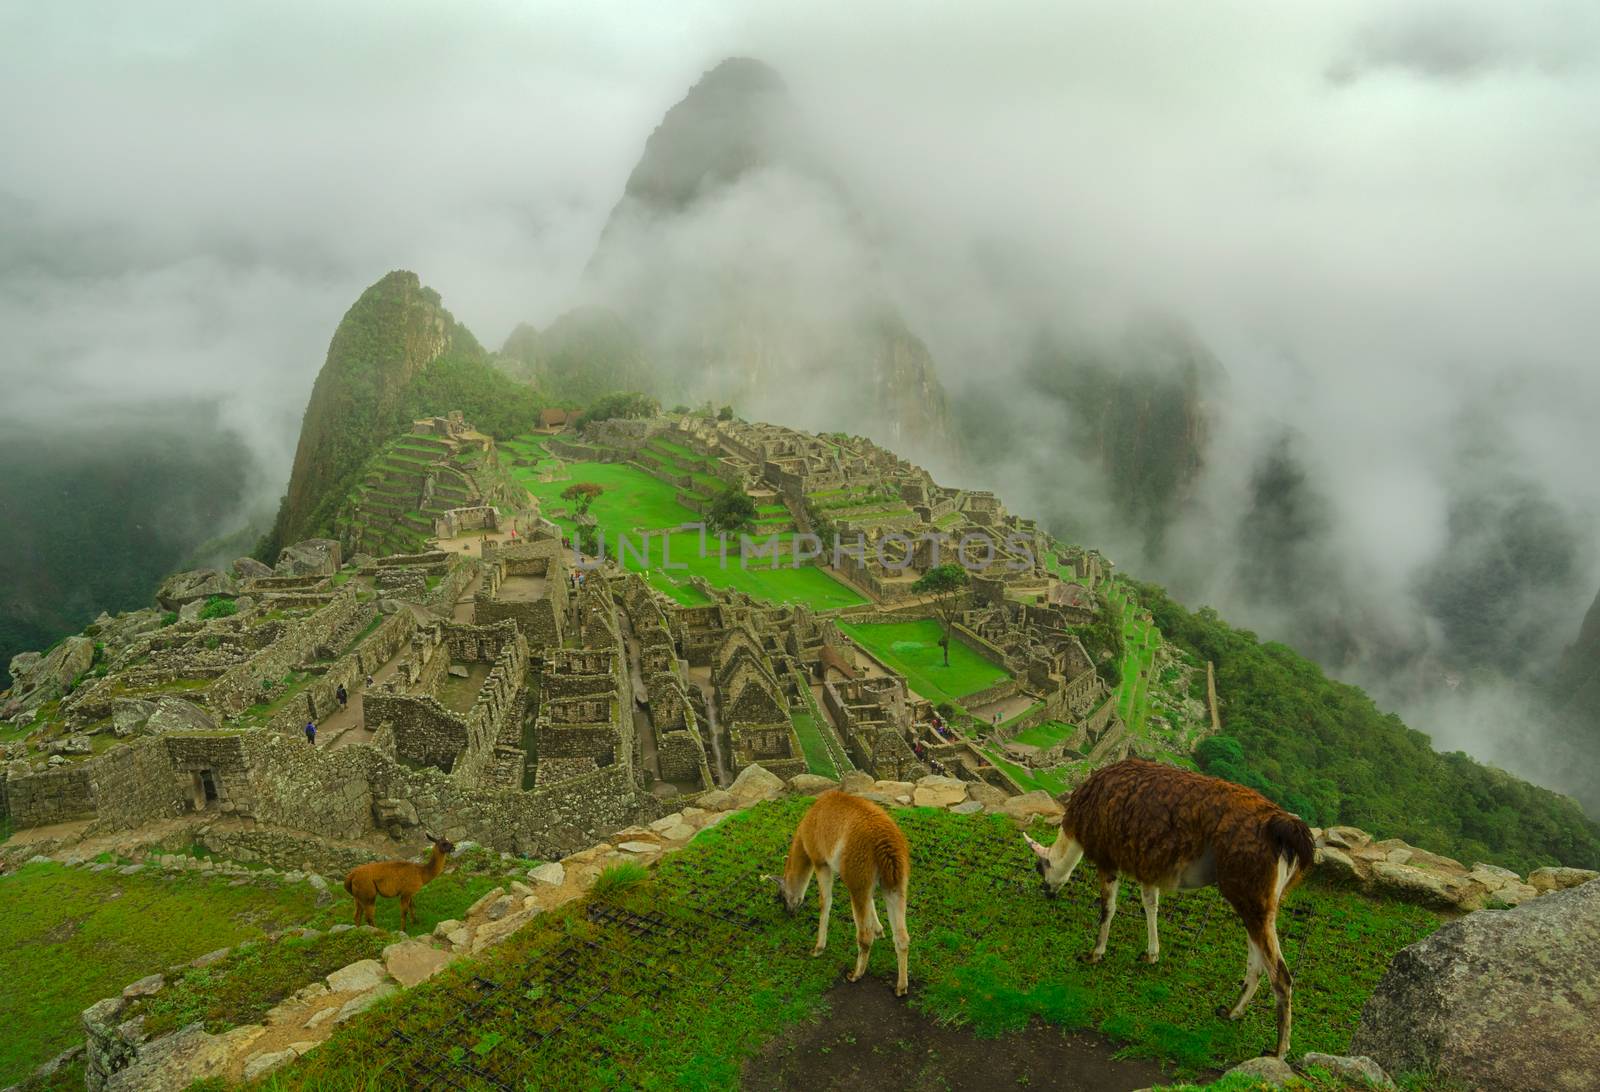 Llamas sometimes get in the way of the photo ops in Machu Picchu.